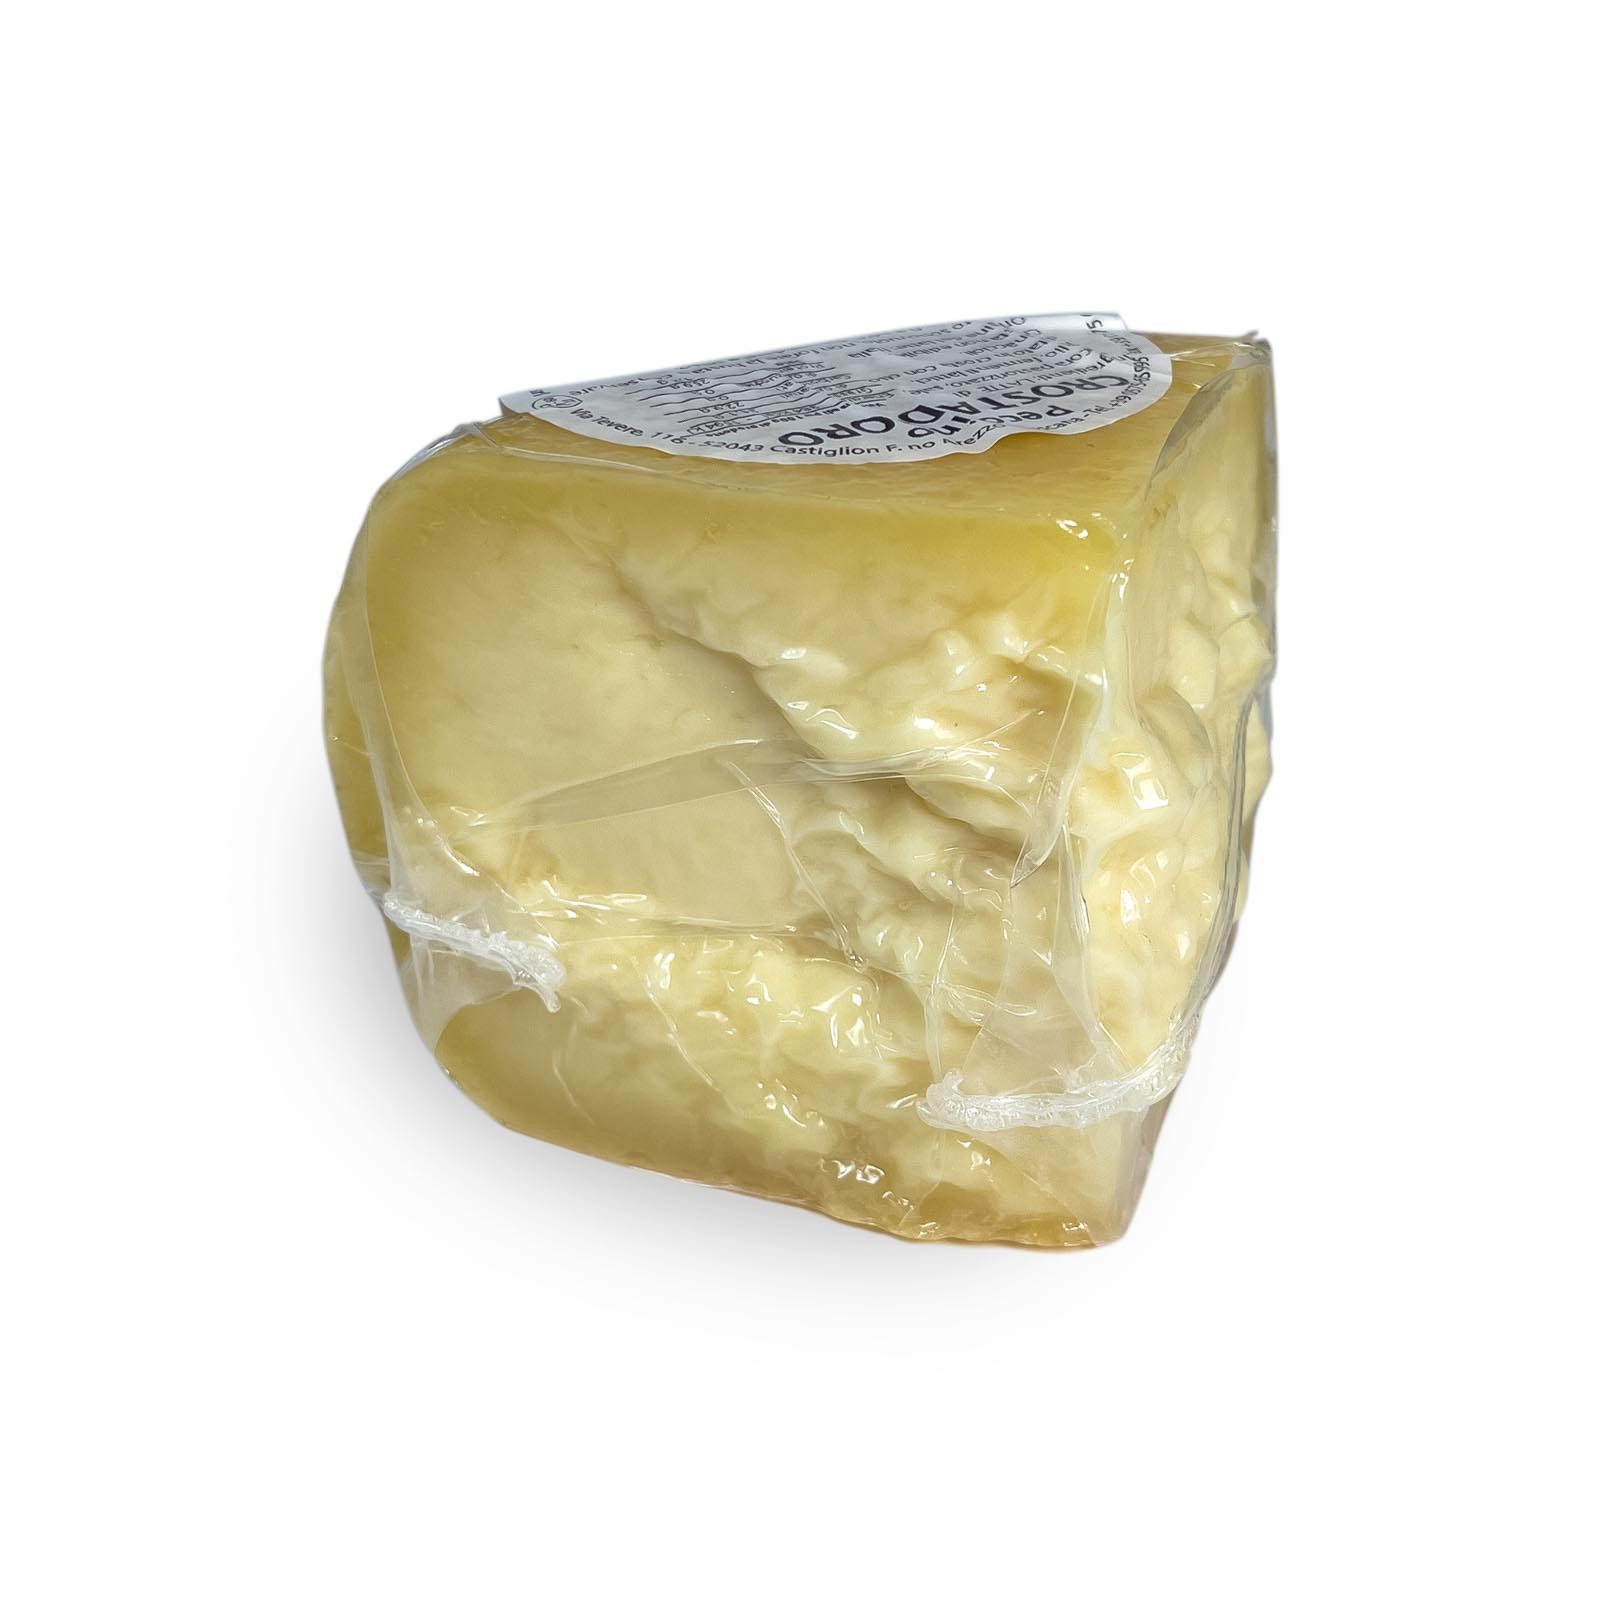 “Crosta D’Oro” Aged Pecorino is a typical product of Tuscan artisan cuisine, characterized by a thick golden crust and an intense and enveloping aroma. Aged for a minimum of 150 days up to a maximum of 10 months, it acquires a strong and slightly spicy flavor. The paste is compact and easily soluble, which makes it perfect for flavoring or accompanying first and second courses.